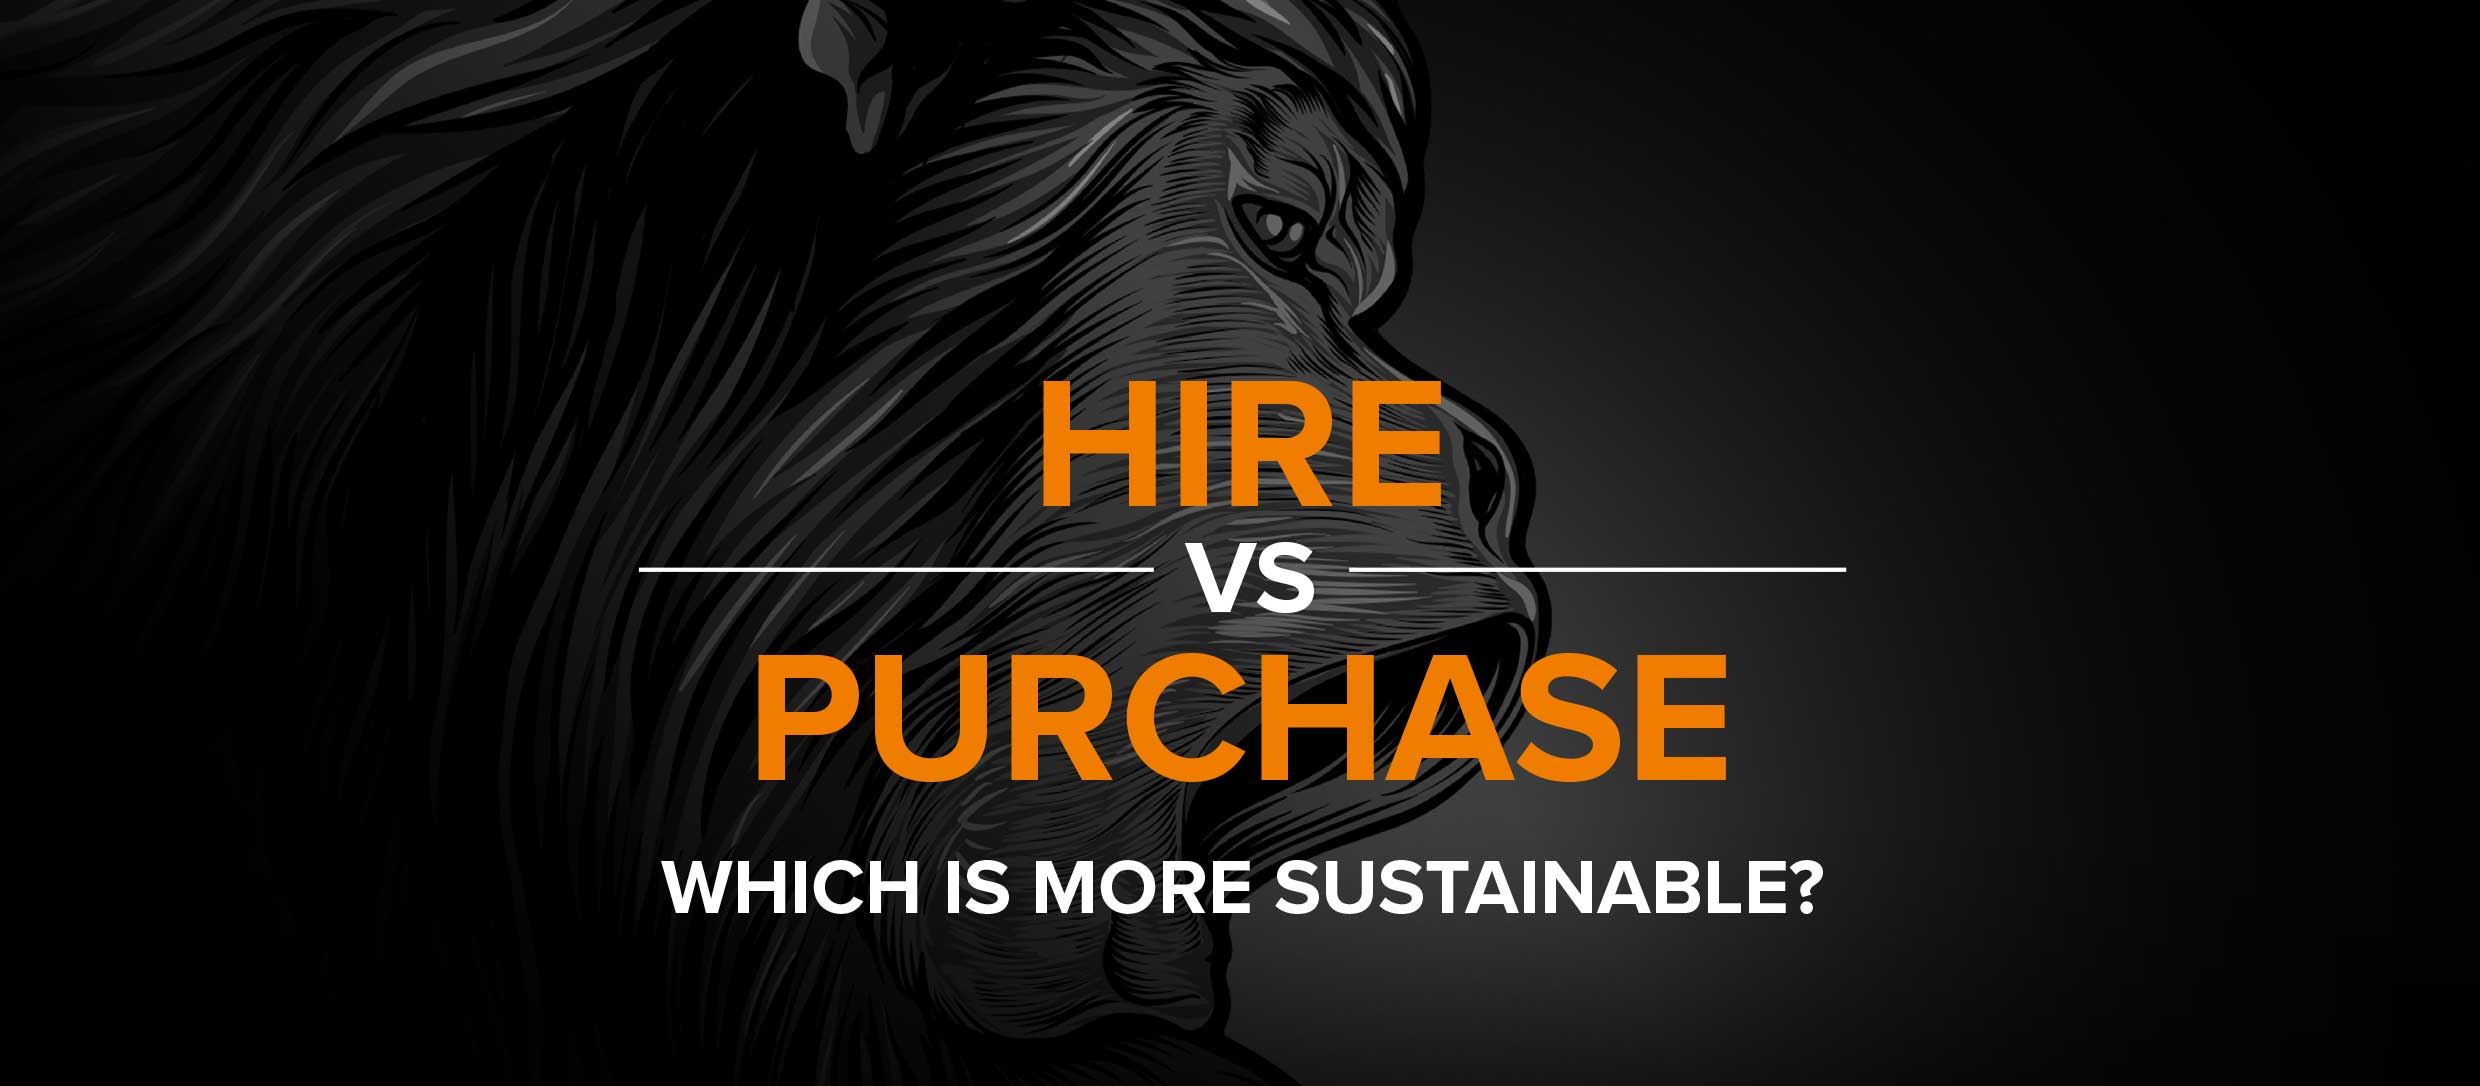 Hire vs Purchase, which is more sustainable?